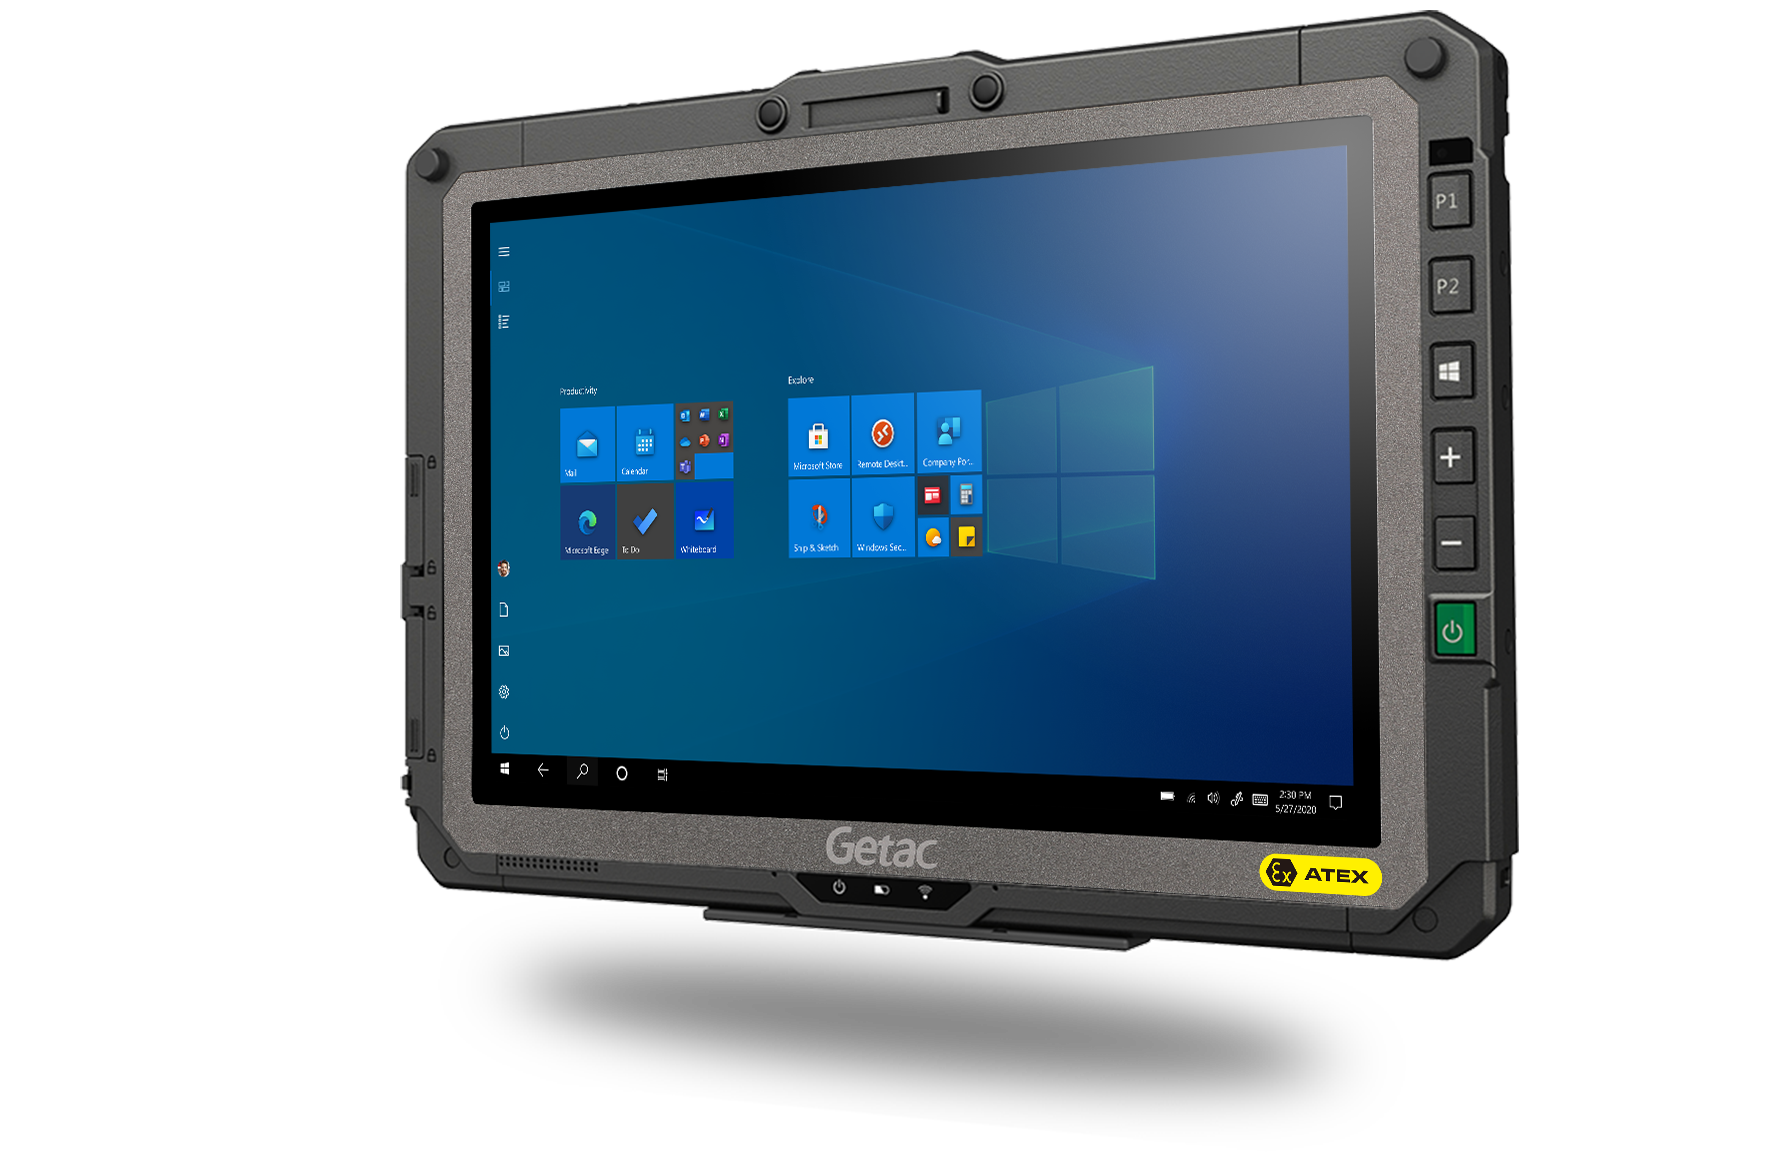 Getac UX10-EX 10-inch Intrinsically Safe Tablet (Zone 2) on white background.